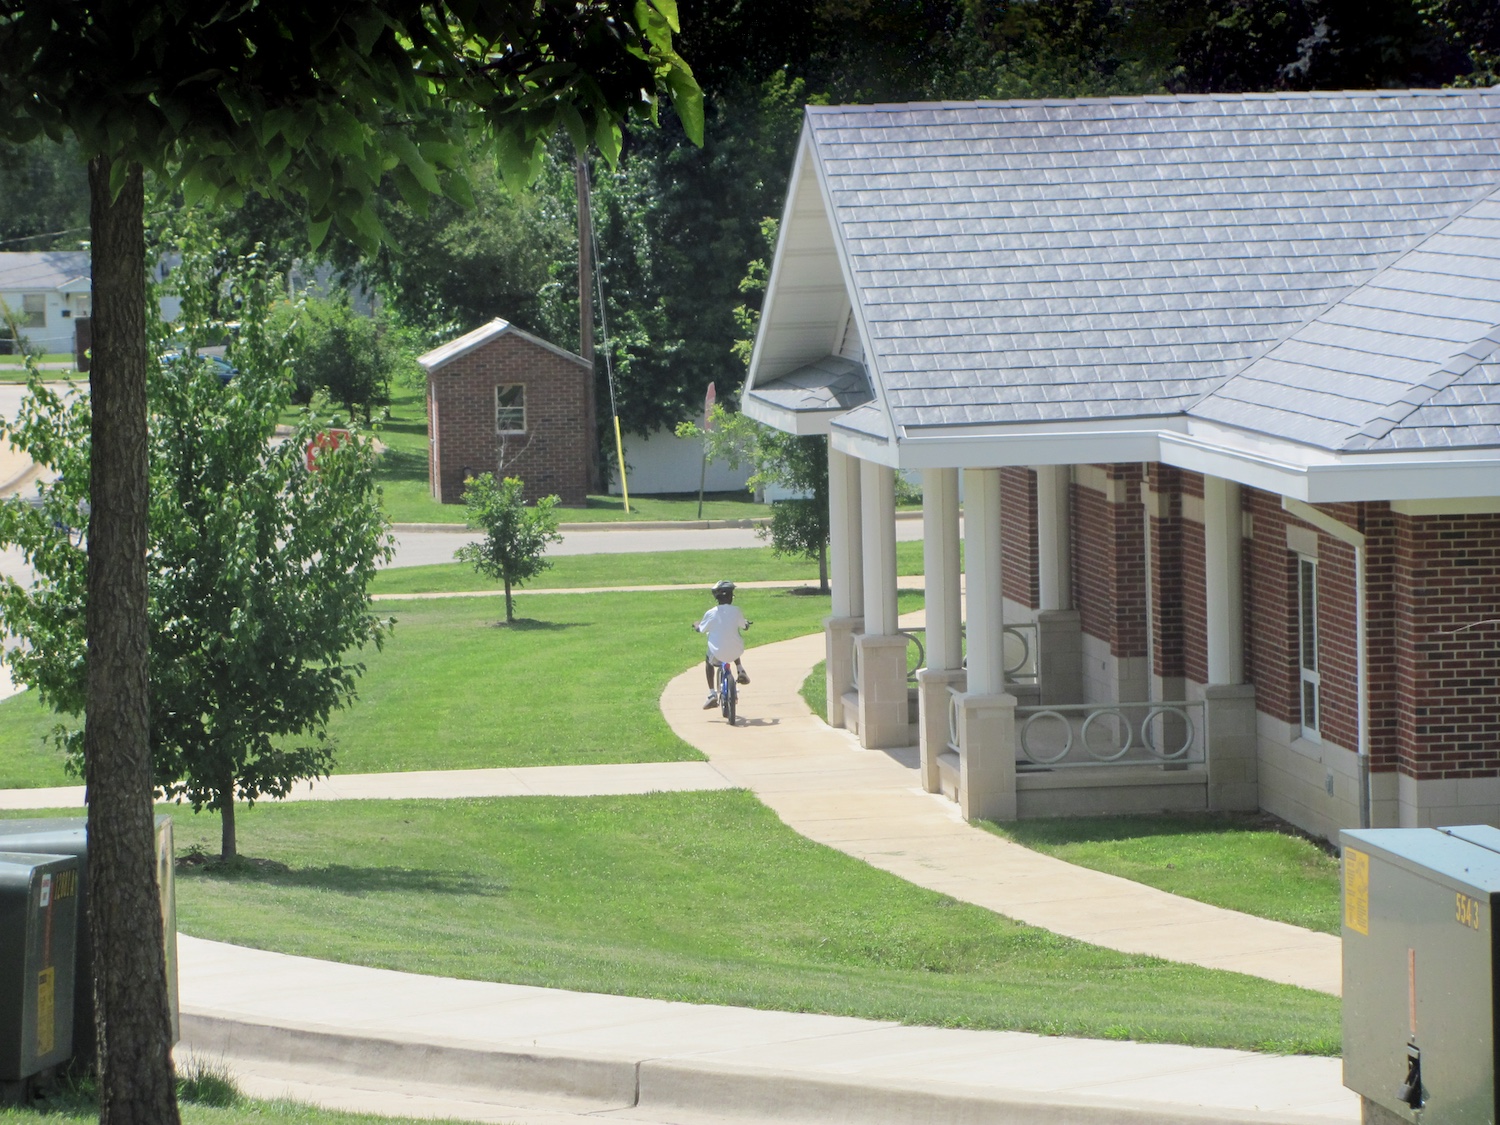 Young boy riding his bike past the residential treatment center on campus